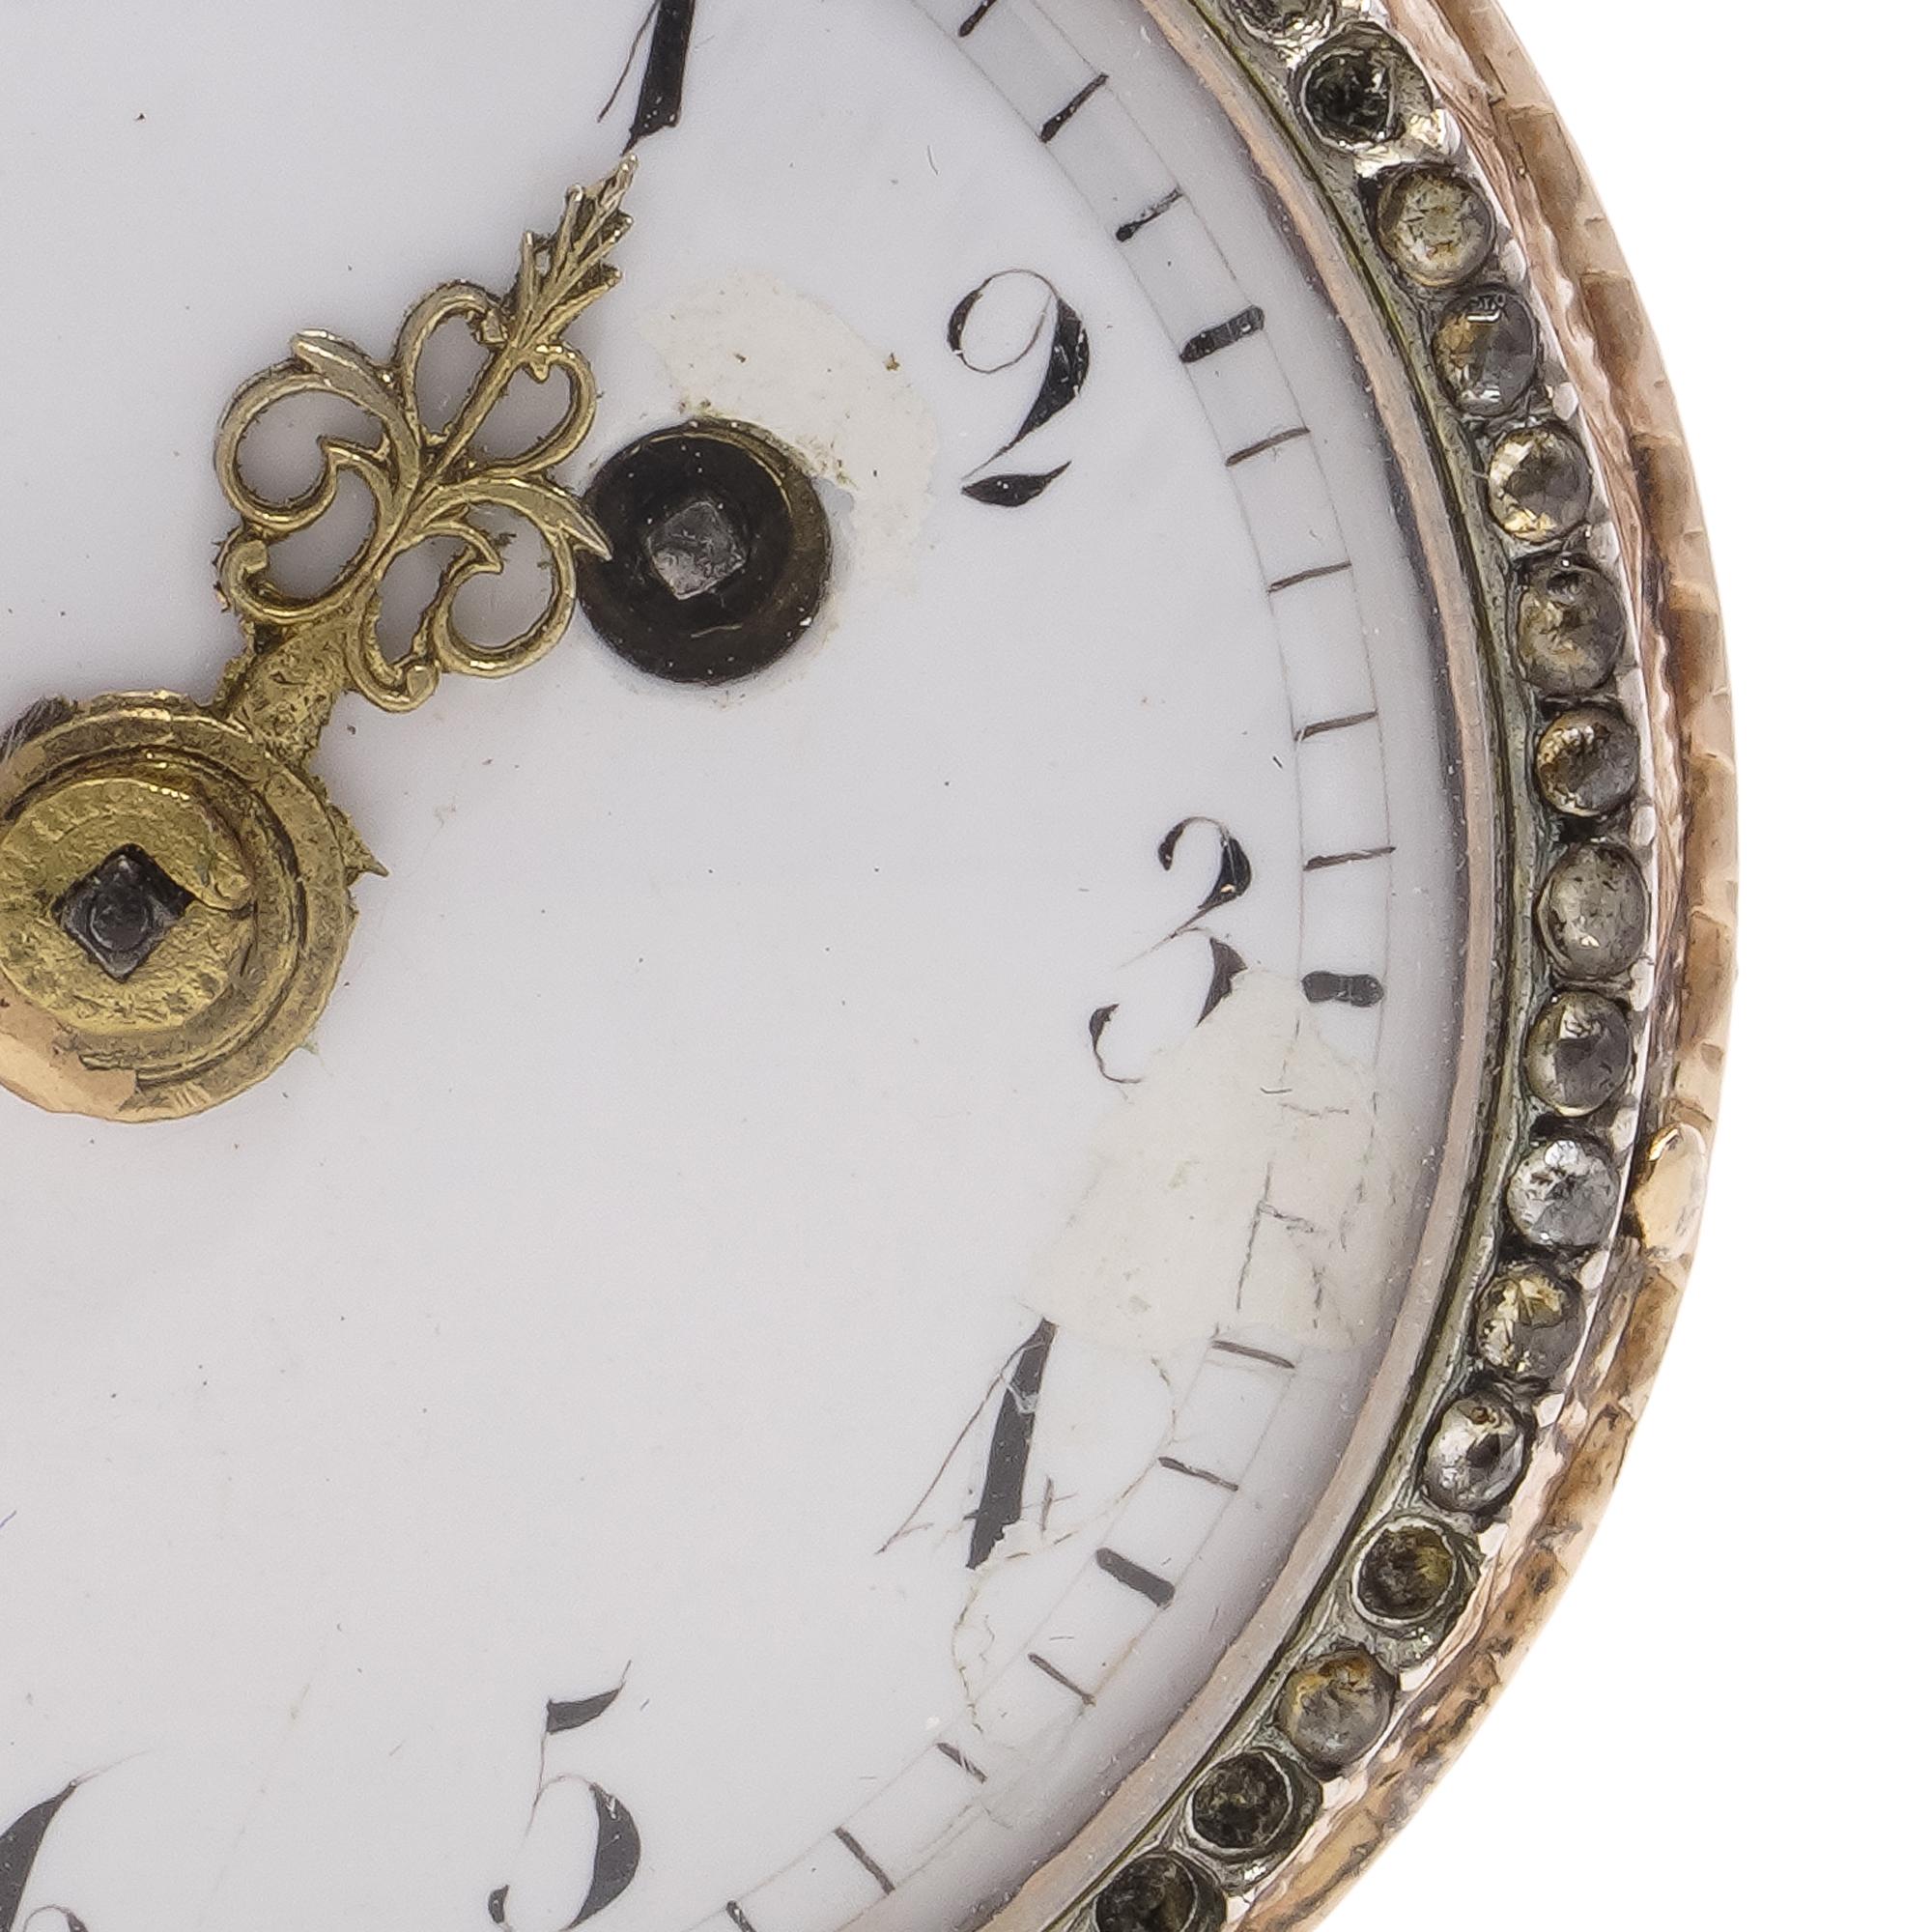 18th-century Lépine Verge movement key wind 18kt gold, a silver pocket watch For Sale 4